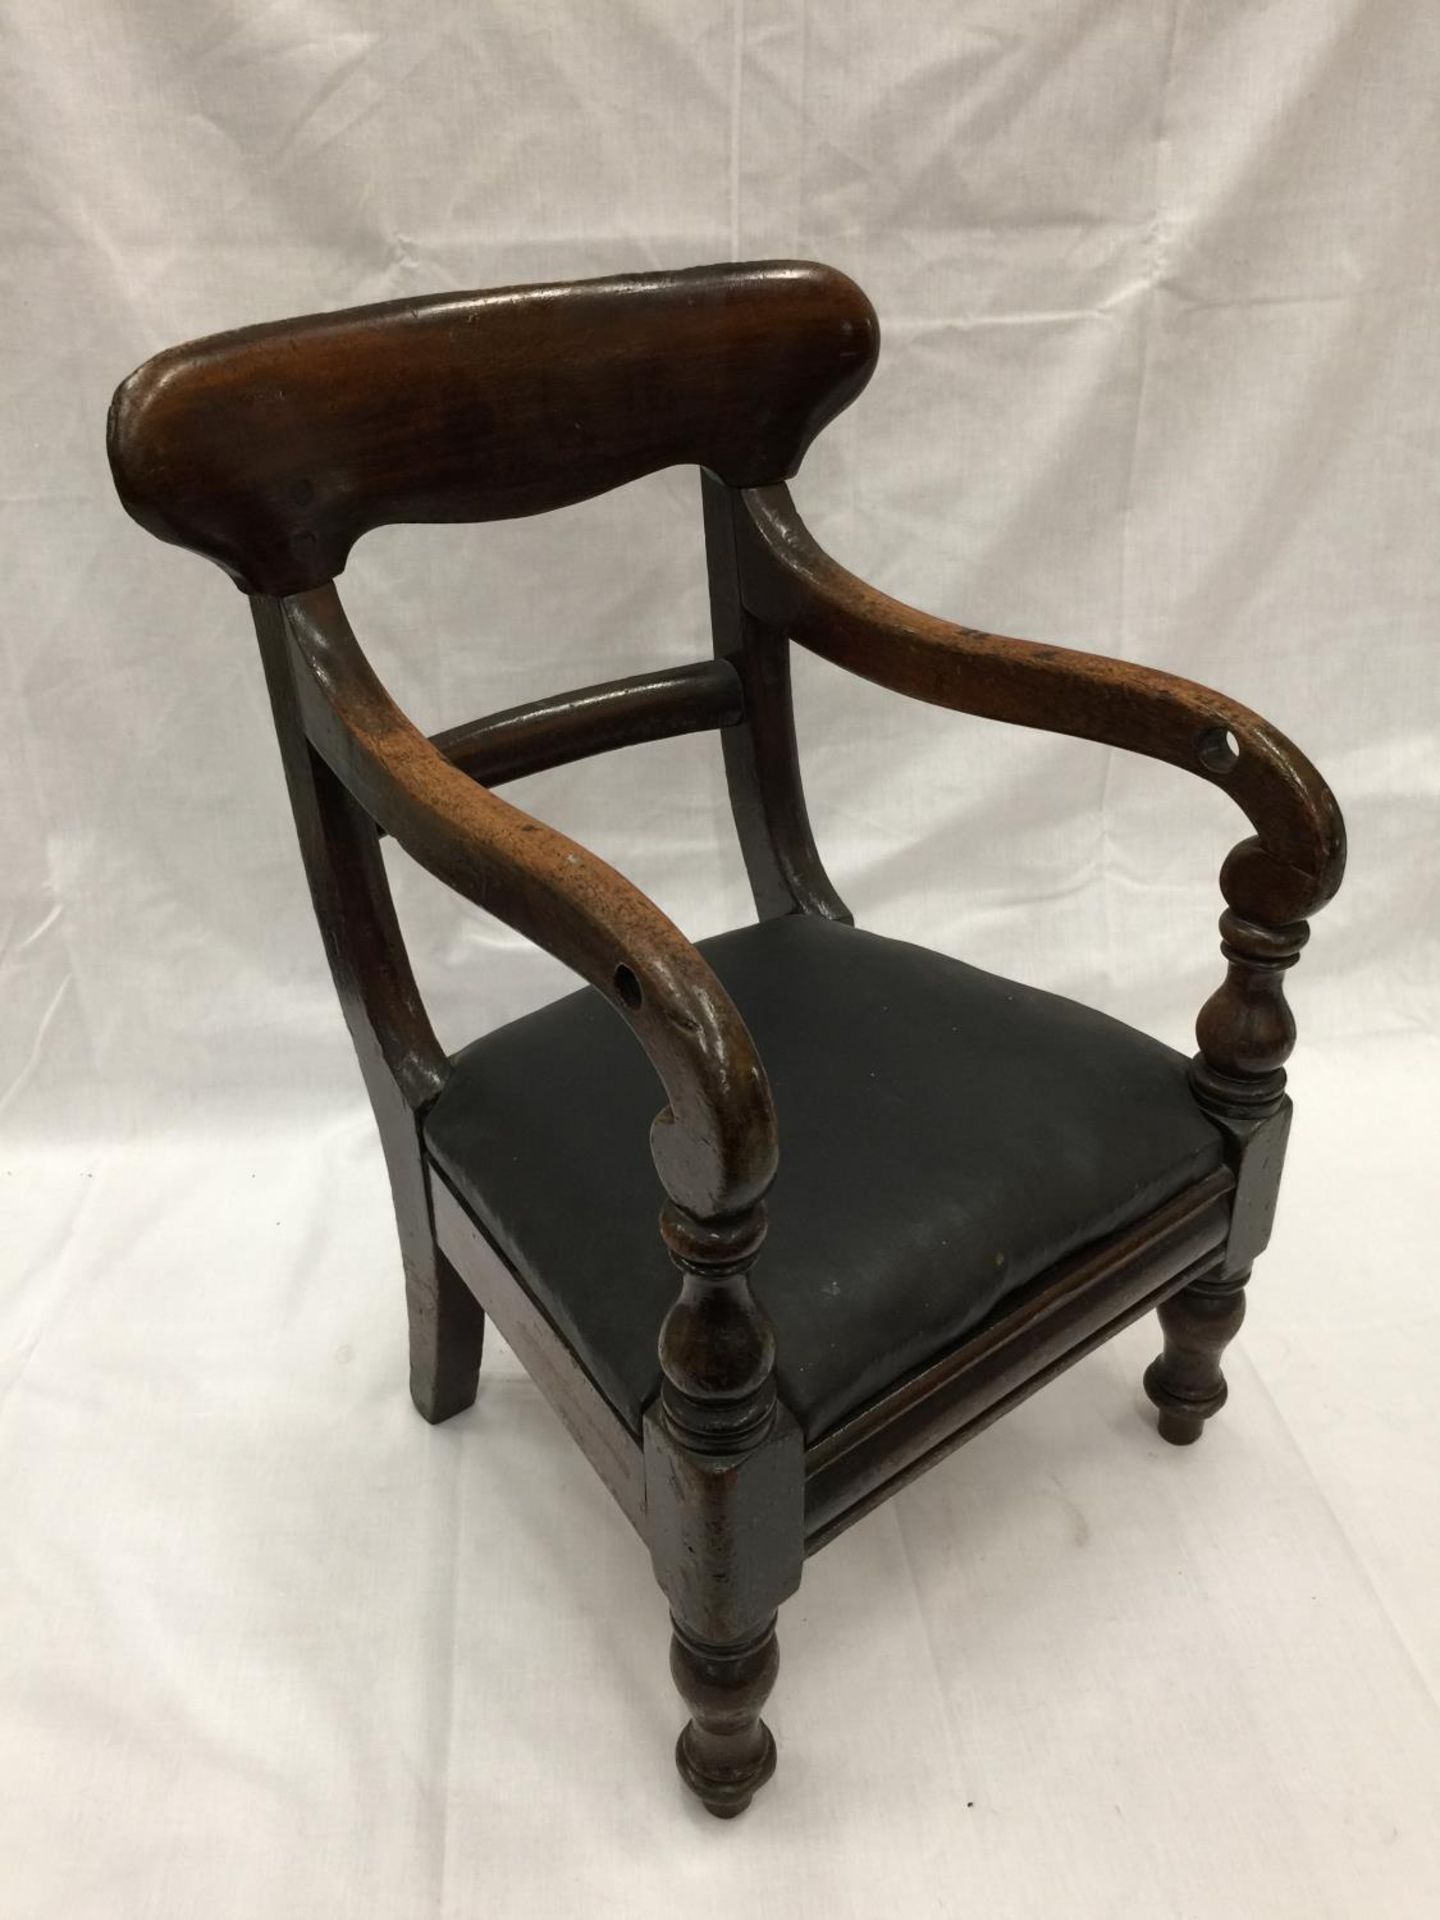 AN 1860'S VICTORIAN CHILD'S OAK CHAIR WITH TURNED LEGS AND A PADDED SEAT